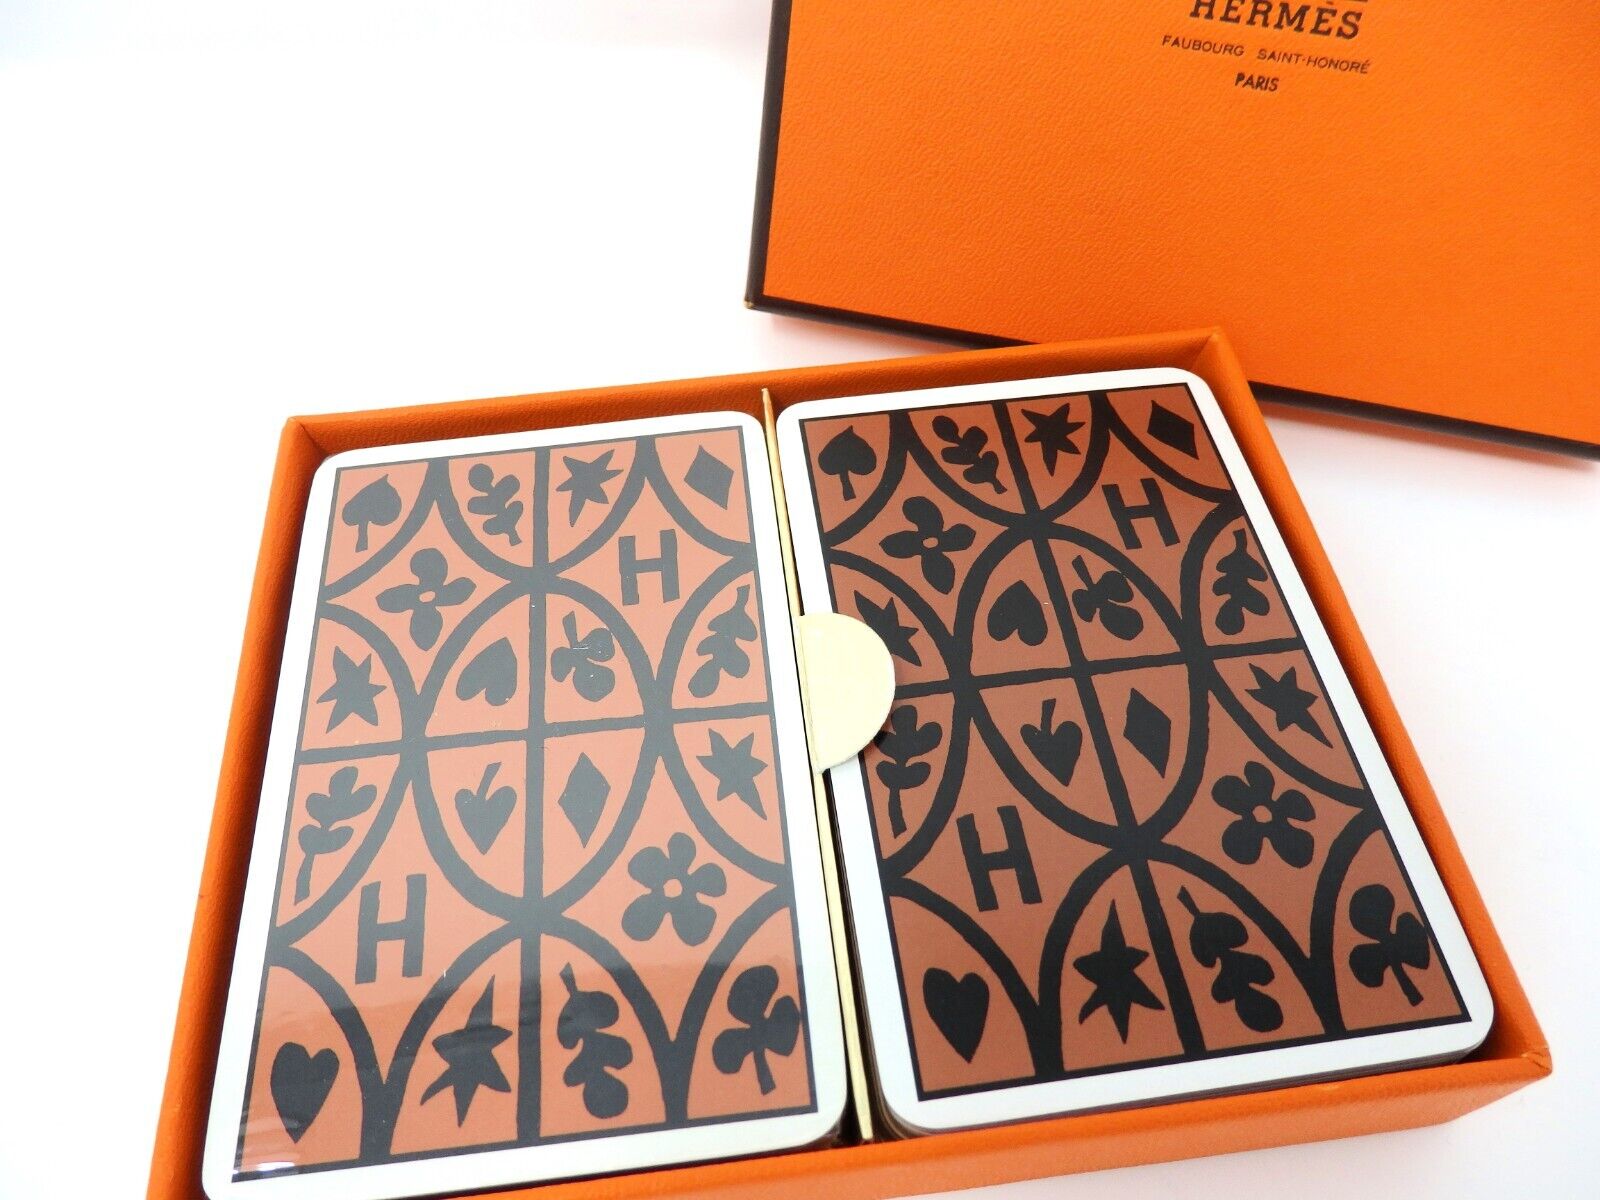 HERMES 2 Deck of Playing Cards Trump Game Authentic 4-mark & H Design Brown JPN